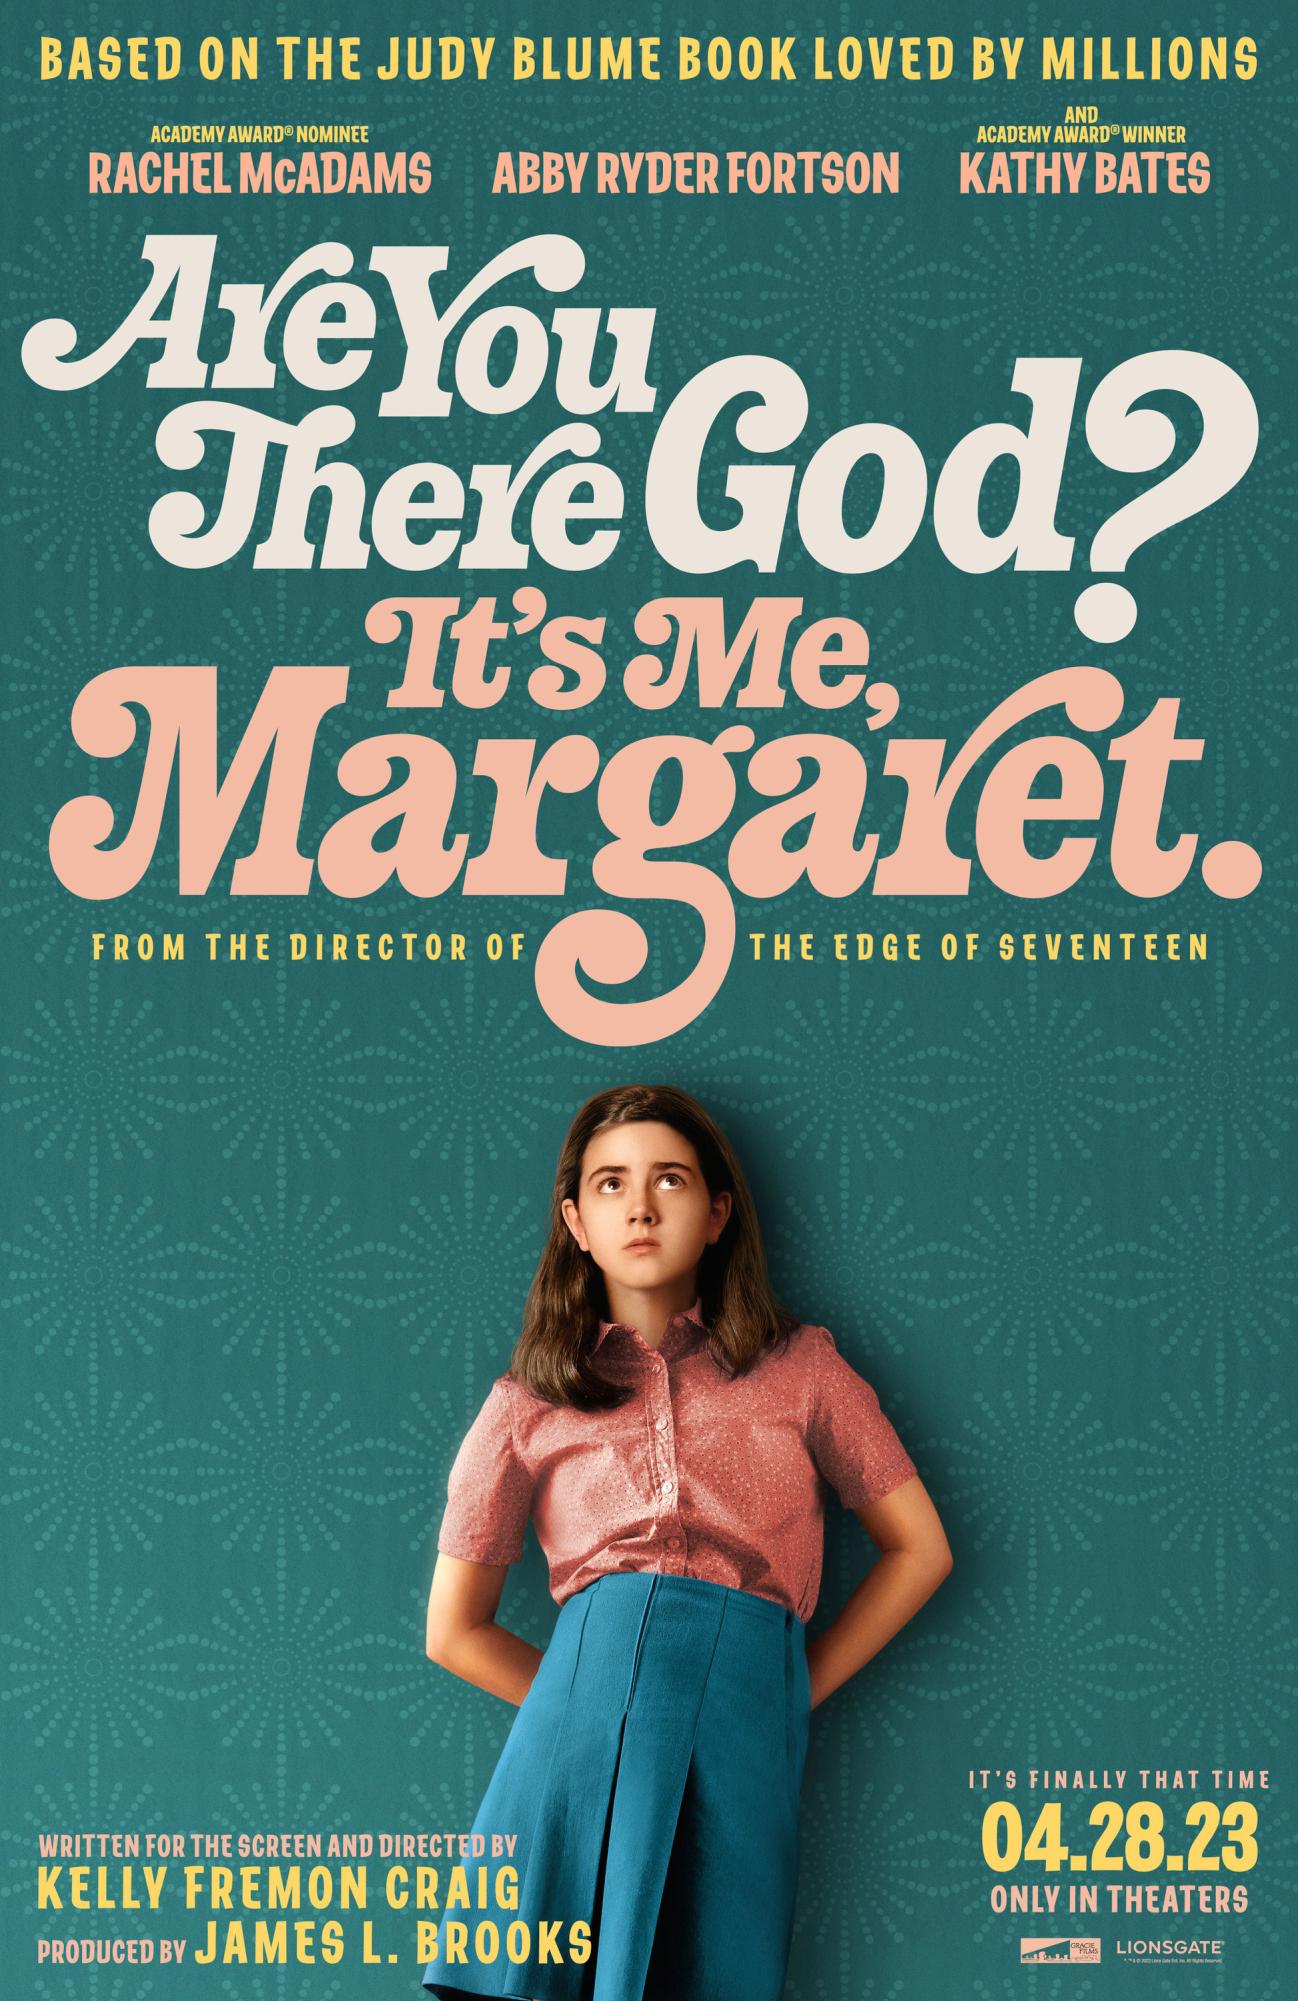 Are You There God? Its Me, Margaret. tells a comedic, yet meaningful, story